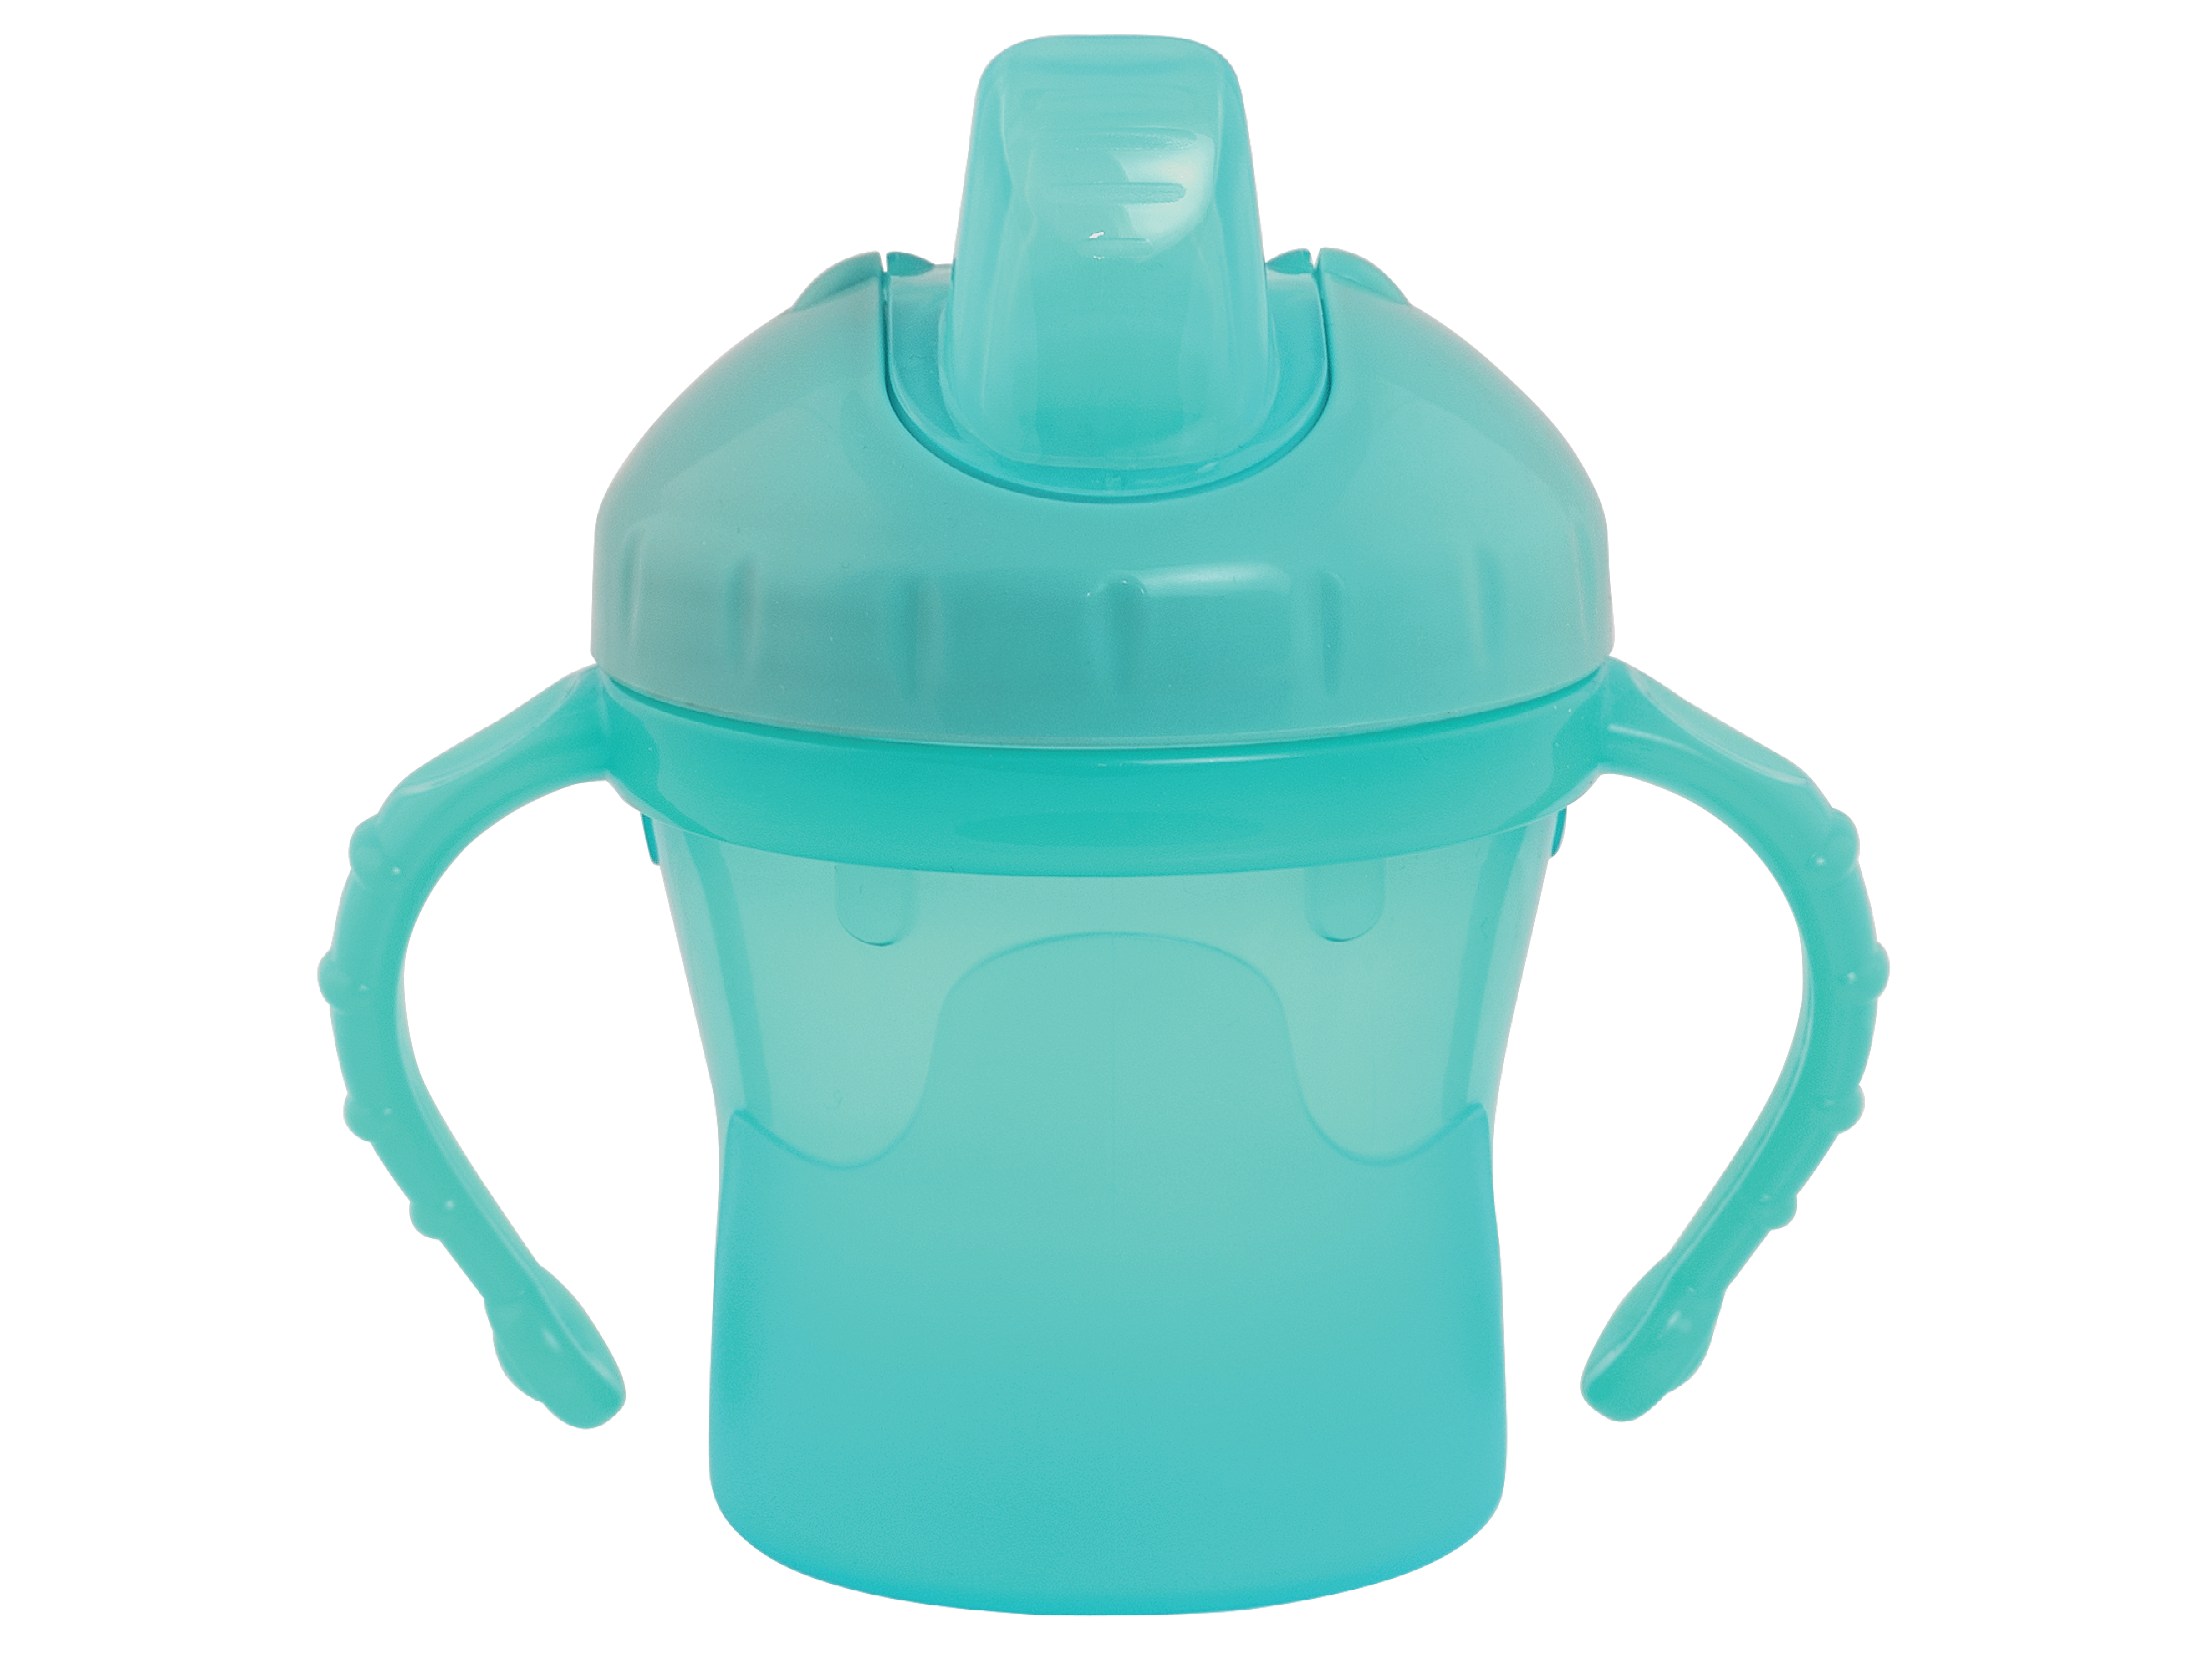 Bambino Easy Sip Cup, Mint, 1 stk.